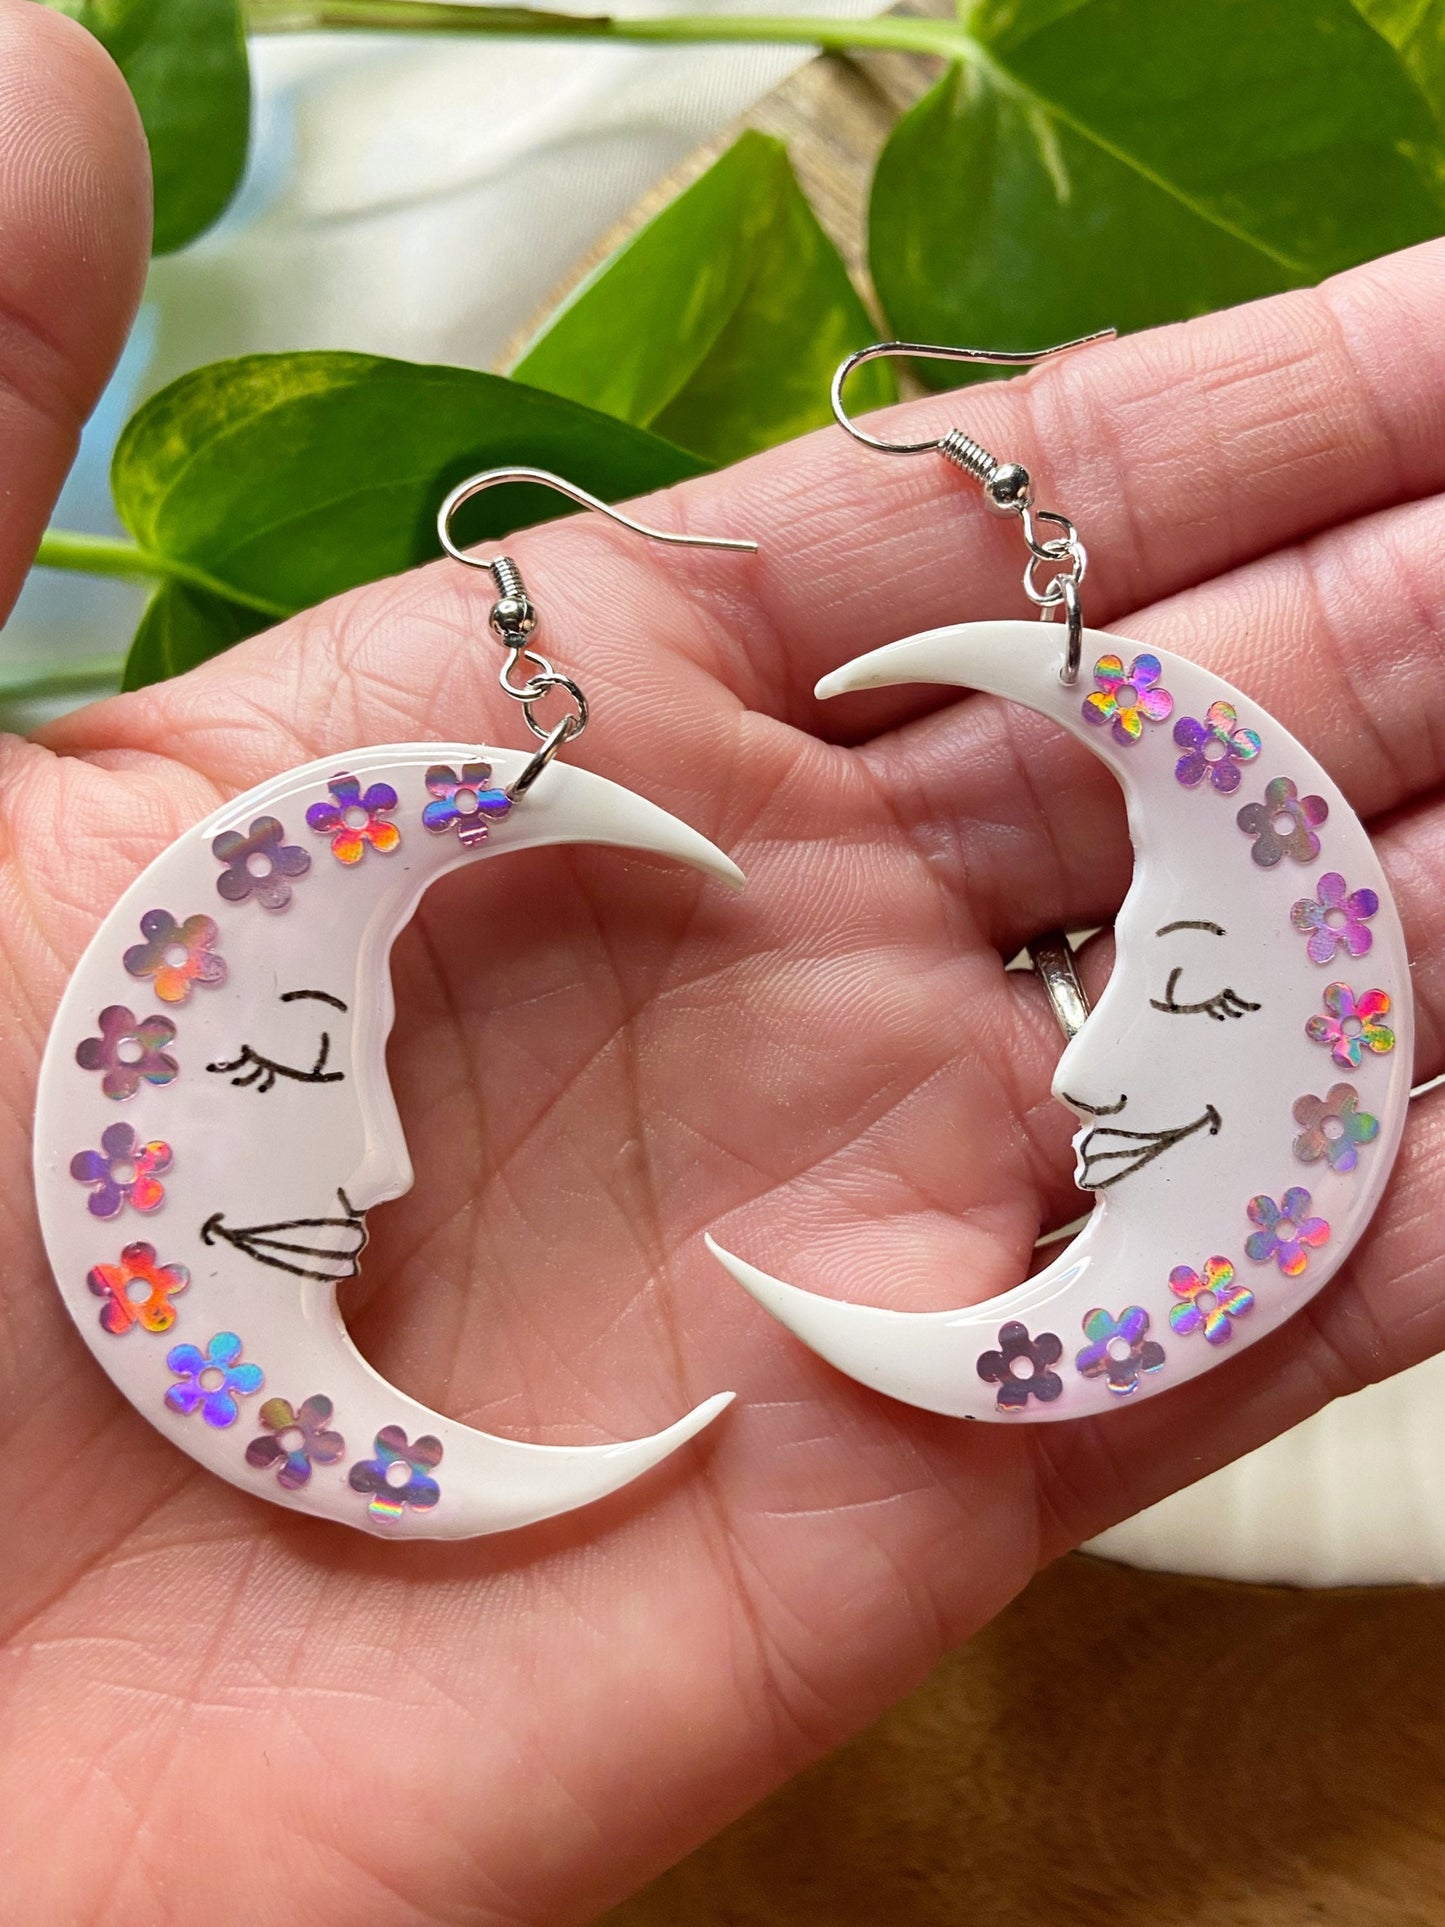 Sleepy Moons- white celestial crescent moon earrings with purple holographic flowers